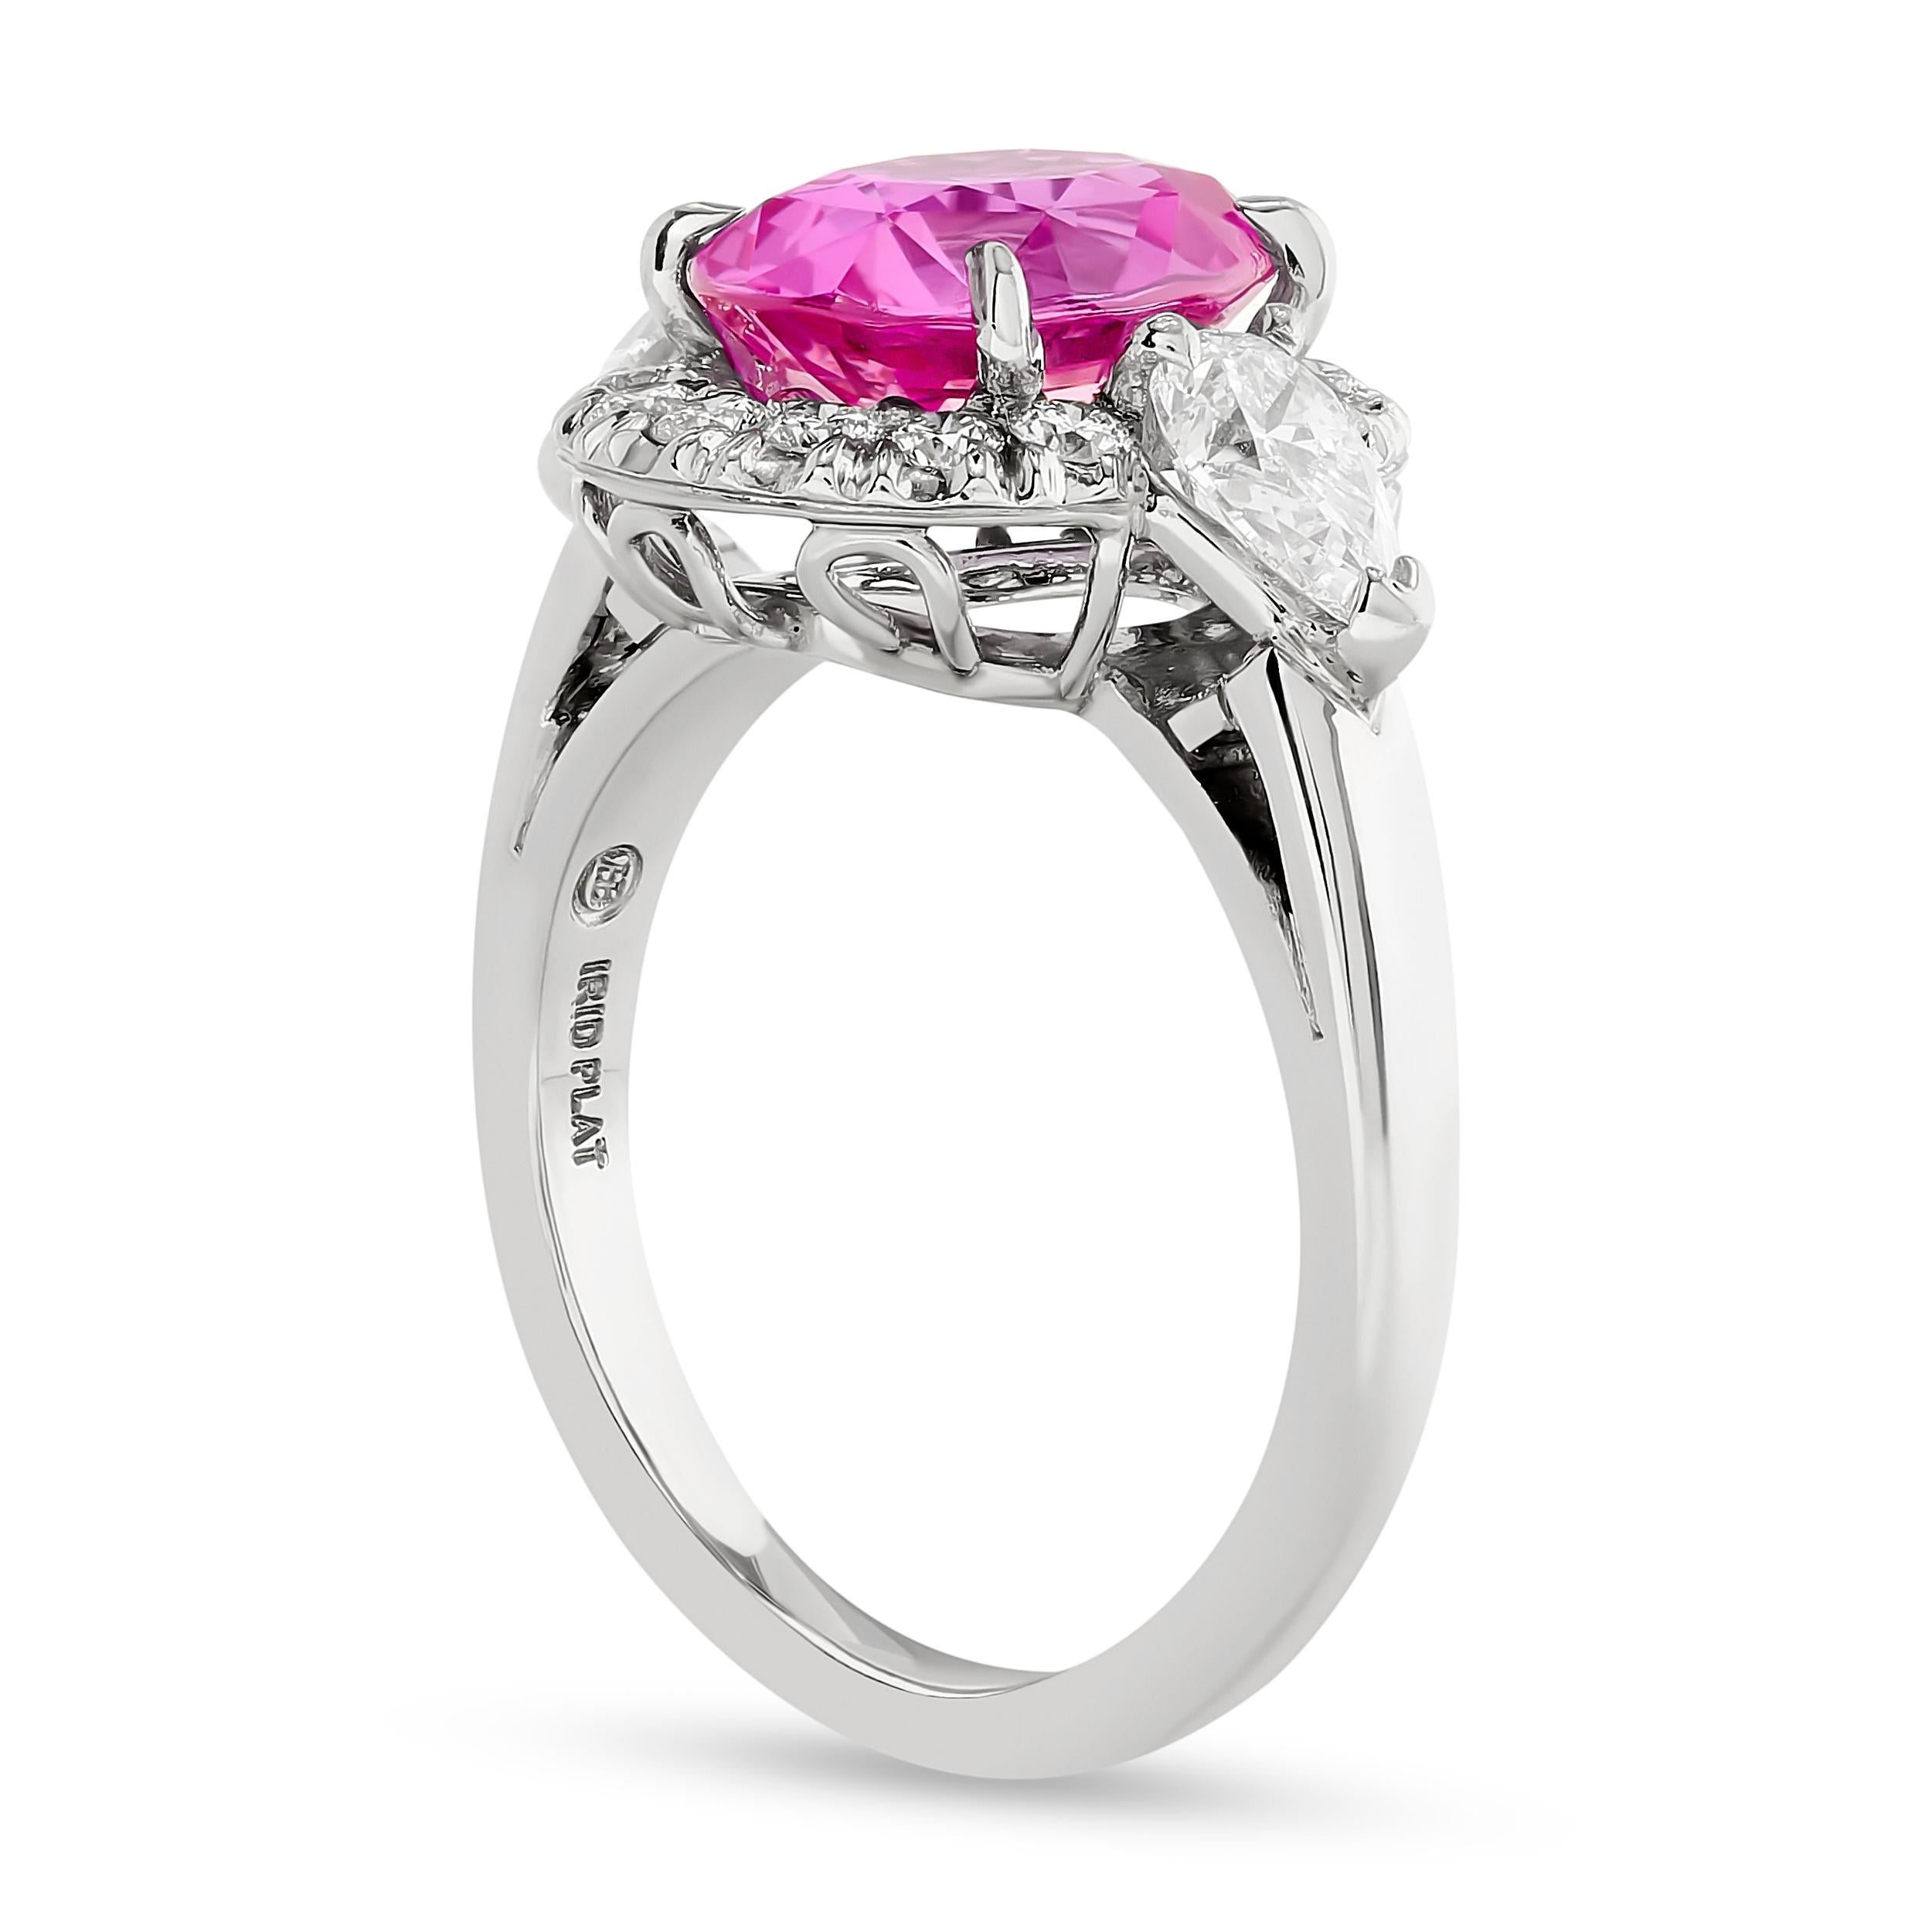 This stunning Oscar Heyman pink sapphire and diamond halo ring is a true masterpiece that captivates with its beautiful craftsmanship.

This ring features one 3.60 carat oval pink sapphire, 2 pear shape and 14 round diamonds totaling approximately